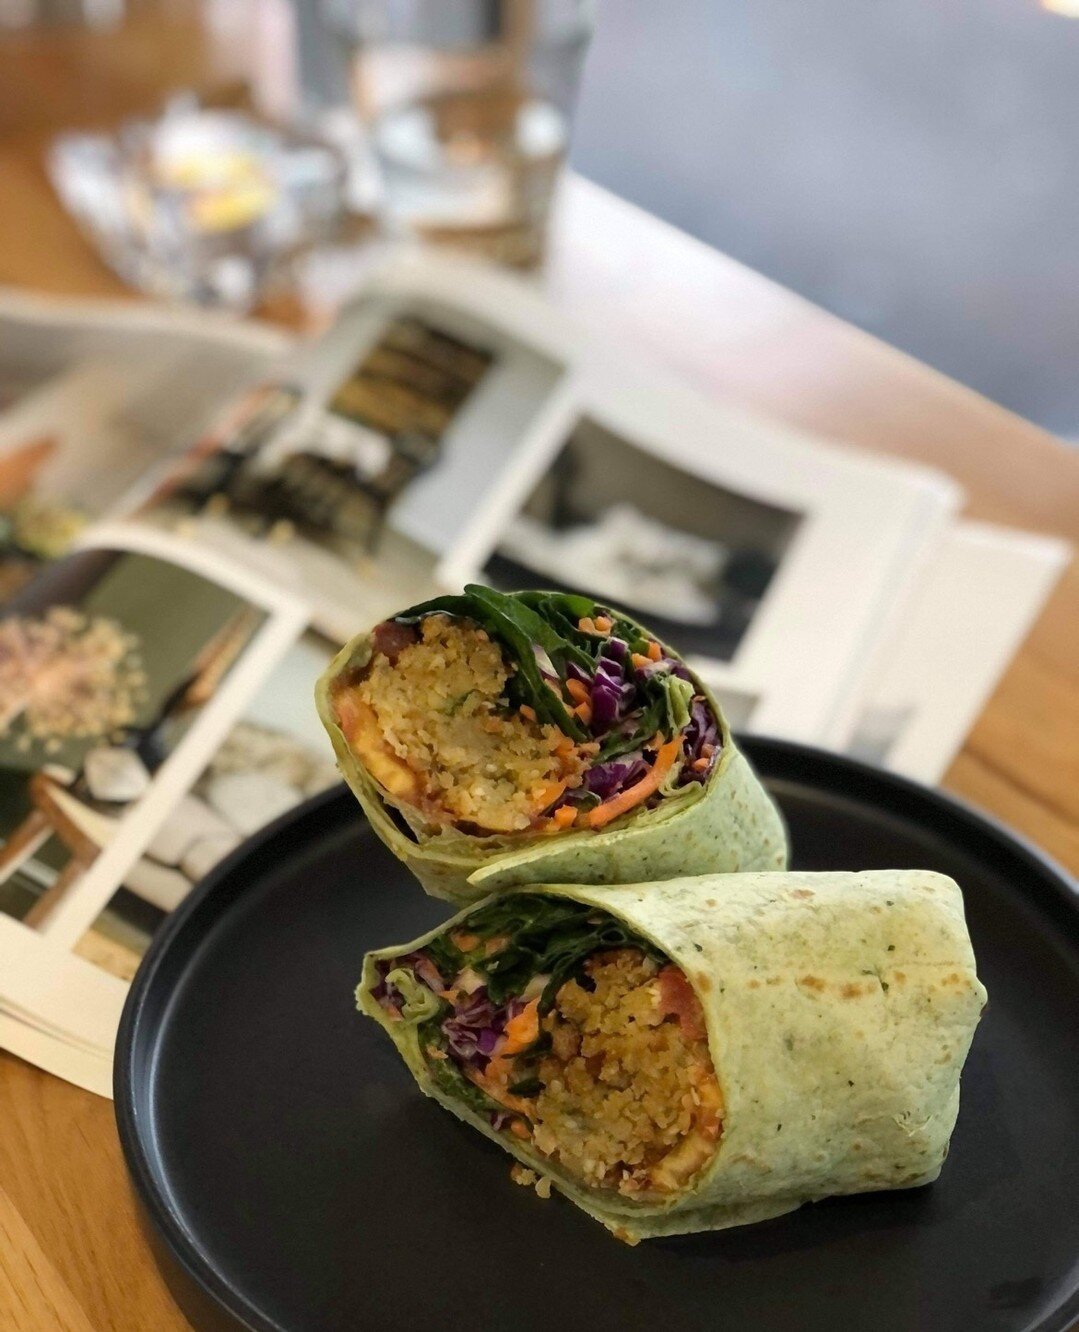 Our Veggie Wraps are perfect when you're on the go! 😋⁠
⁠
⁠
⁠
#extractedivanhoe #coffee #ivanhoecafe #dineinivanhoe #melbournecafe #hungry #delicious​#breakfast #healthylifestyle #supportlocal #brunchinmelbourne #foodiegram #coffeeshop #melbourne #fo